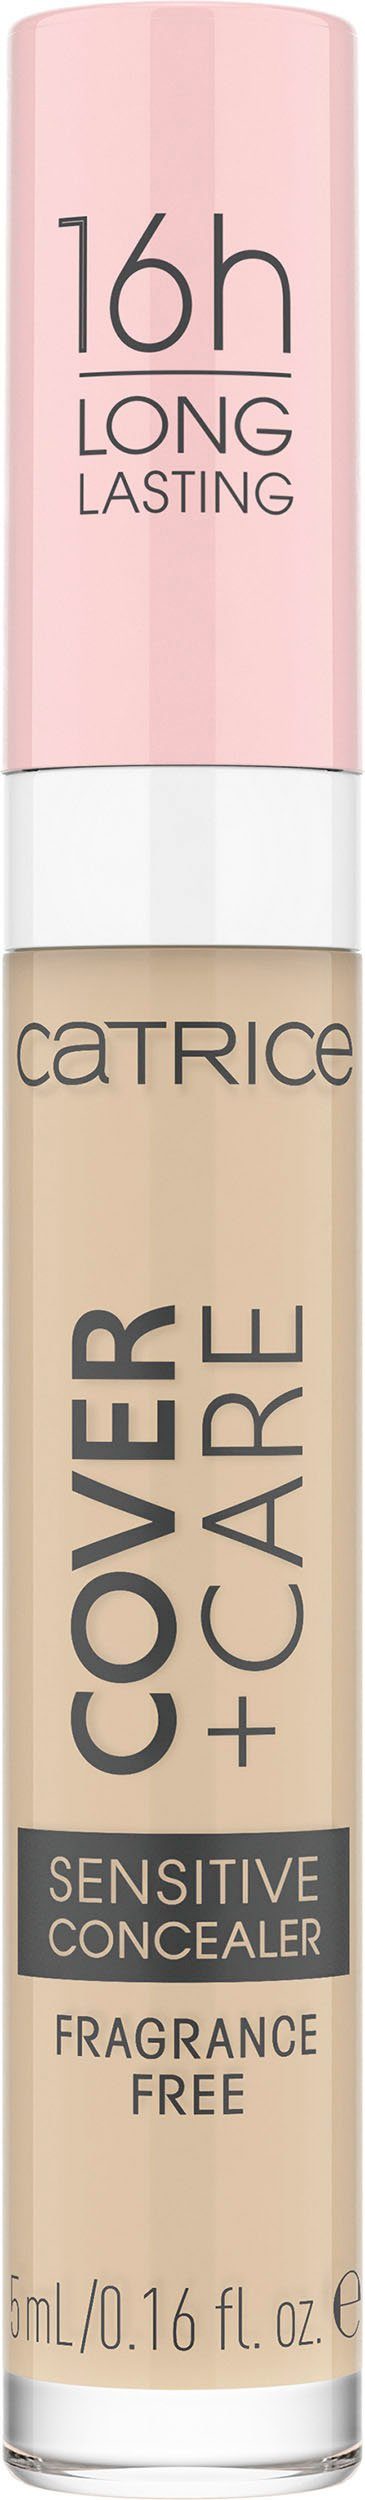 Catrice Concealer Catrice 3-tlg. 010C + Sensitive nude Care Concealer, Cover